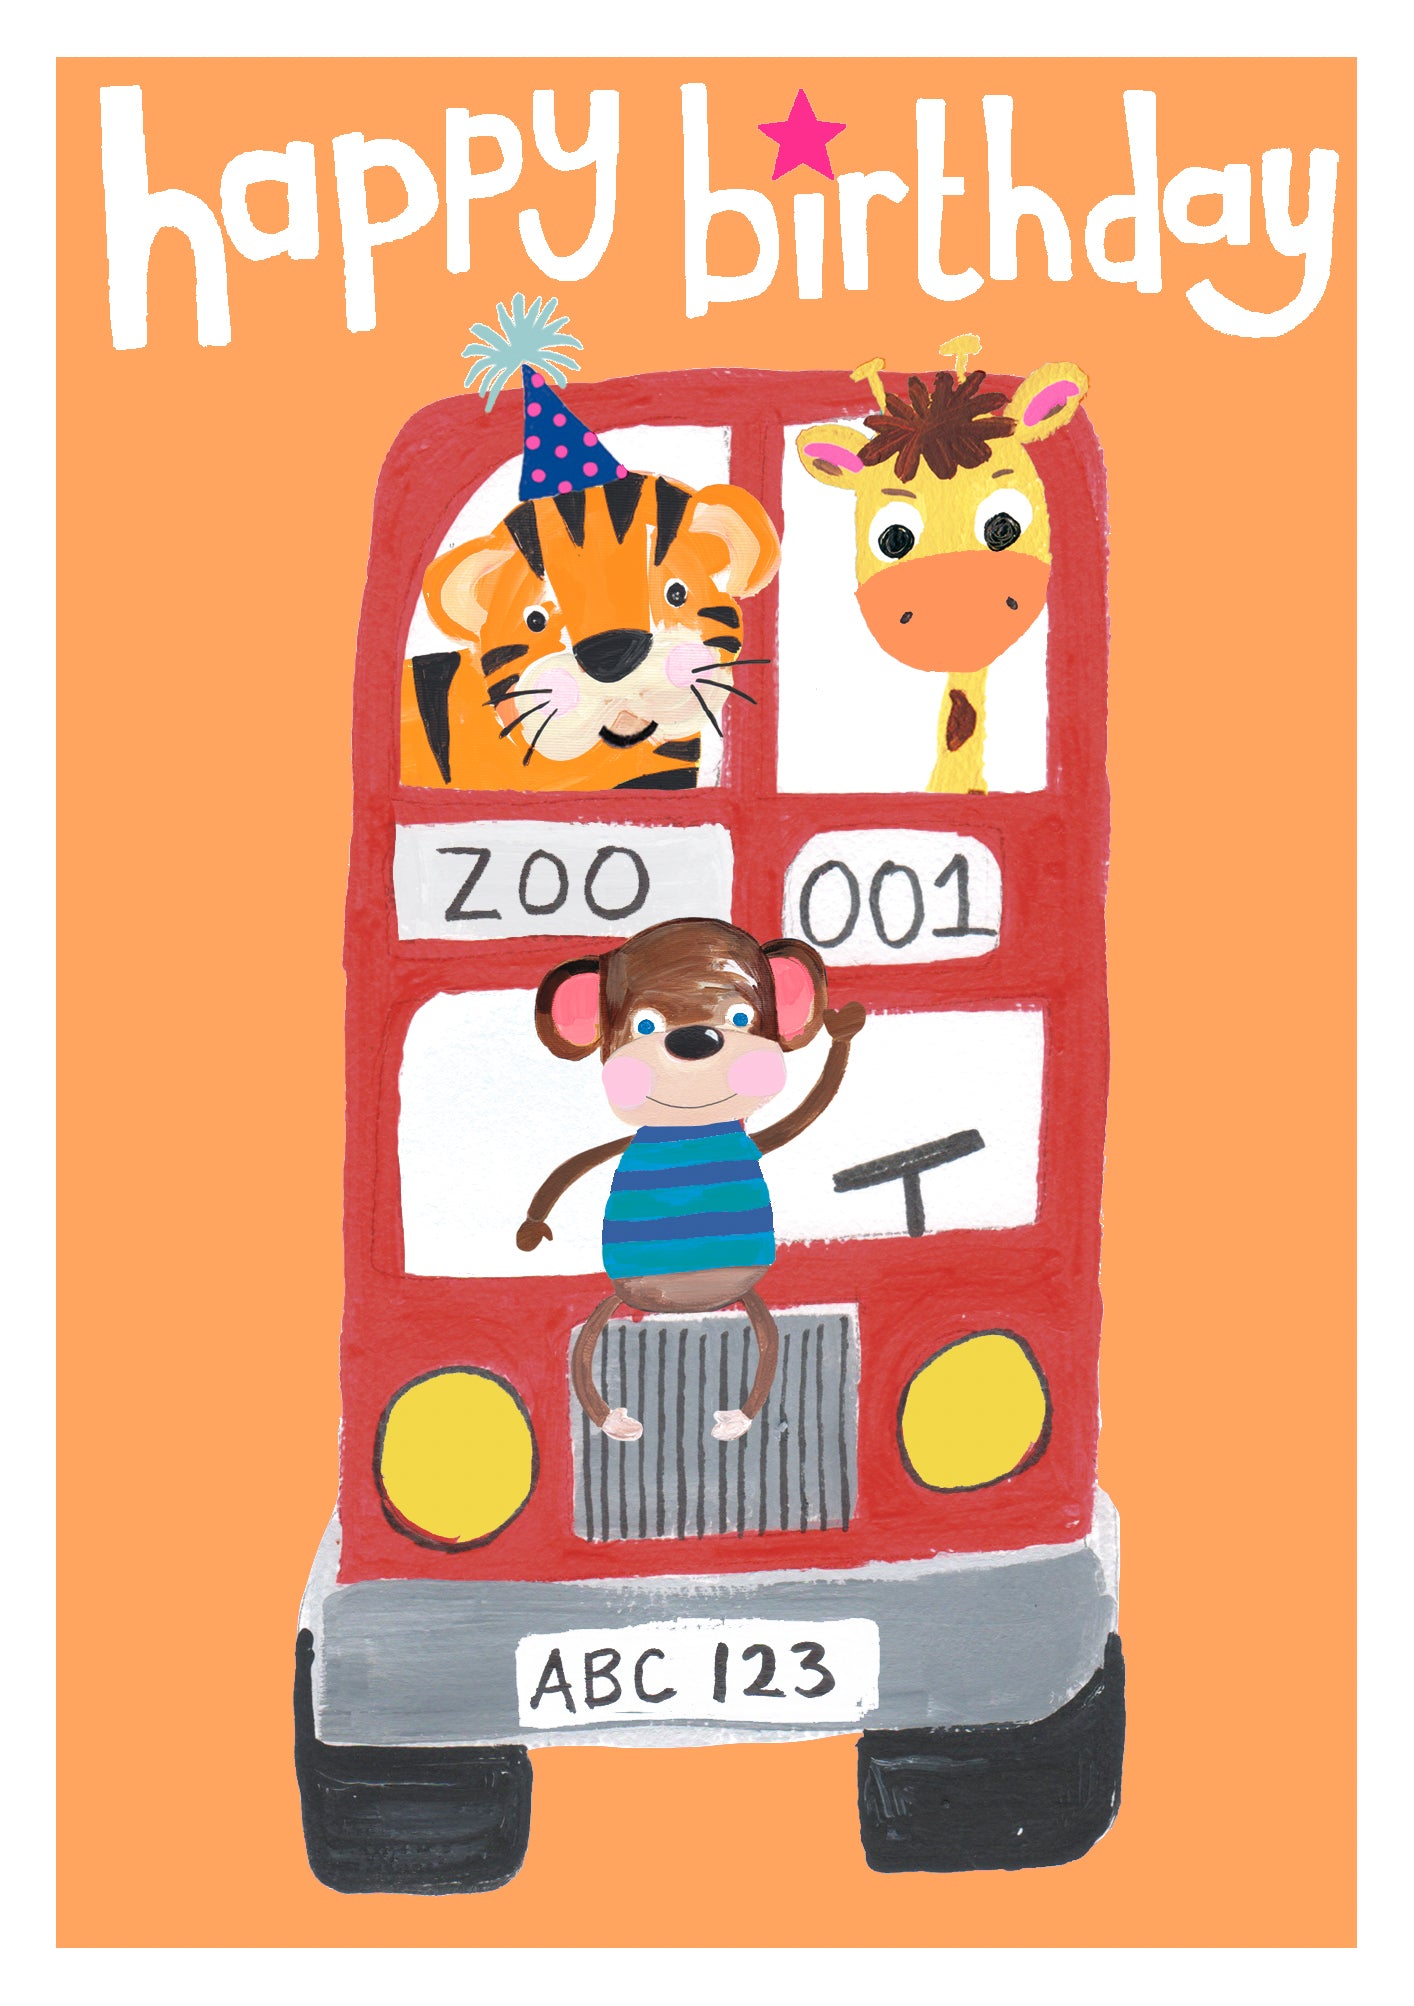 Zoo Party Bus Kids Birthday Card from Penny Black